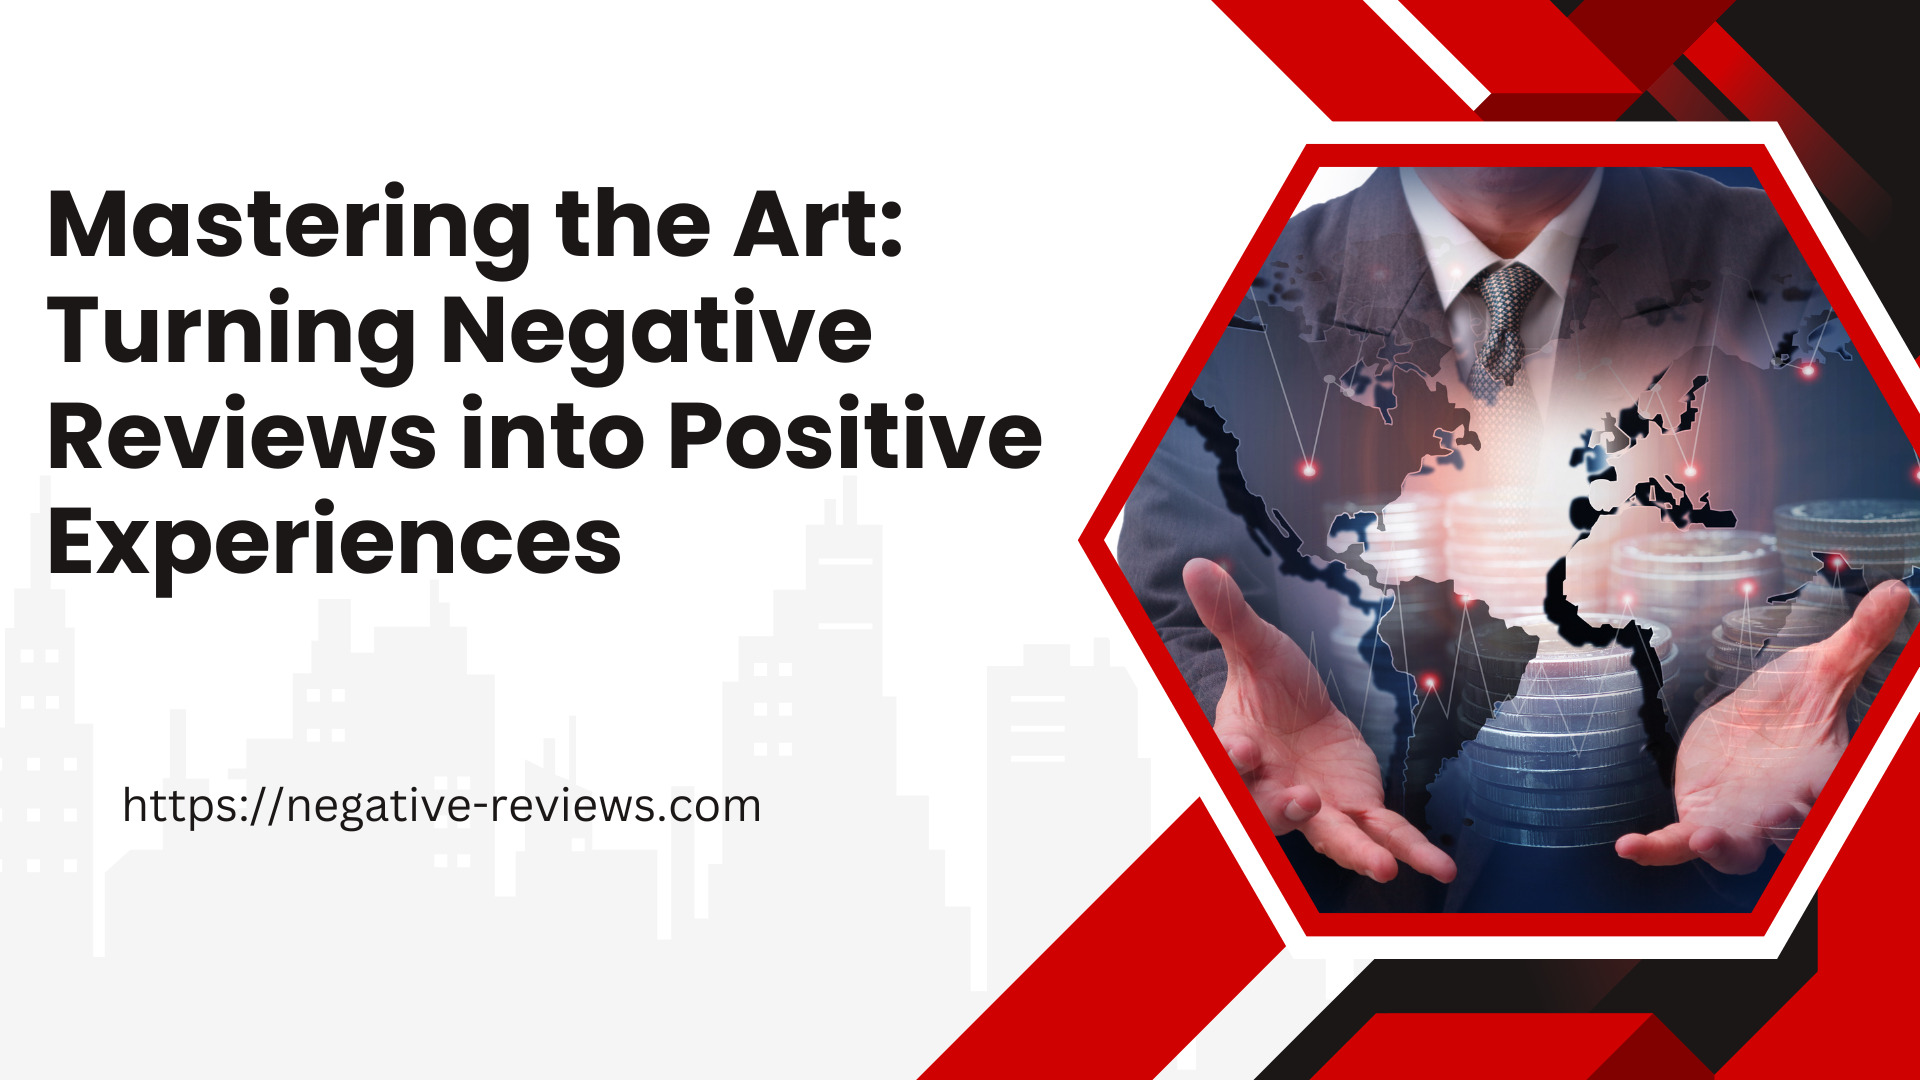 Mastering the Art: Turning Negative Reviews into Positive Experiences